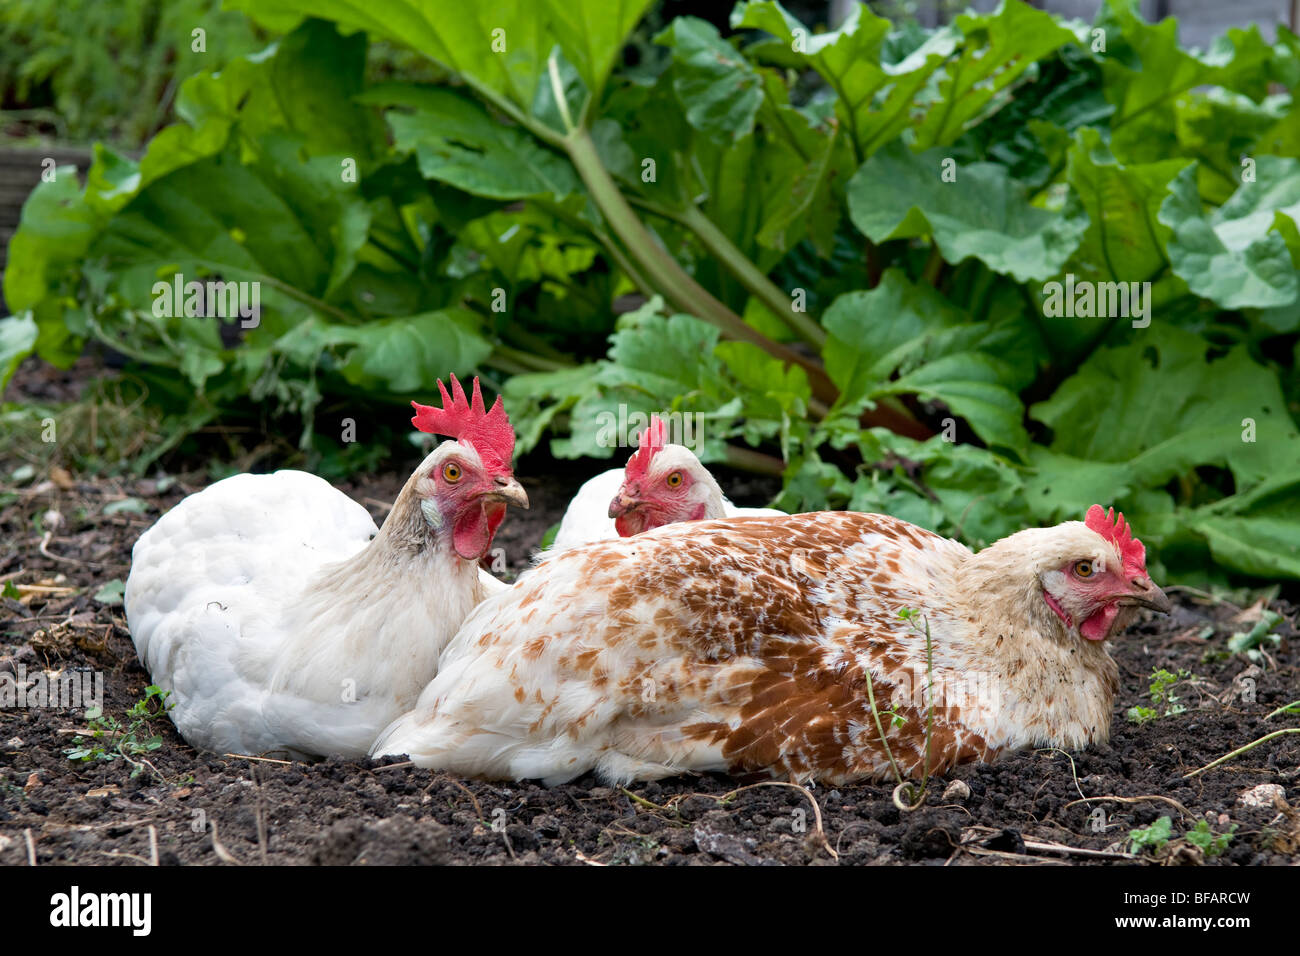 Chickens, type White Star, rhode star and a Brown Amber, in the middle of a dirt bath with rhubarb plants behind them. Stock Photo